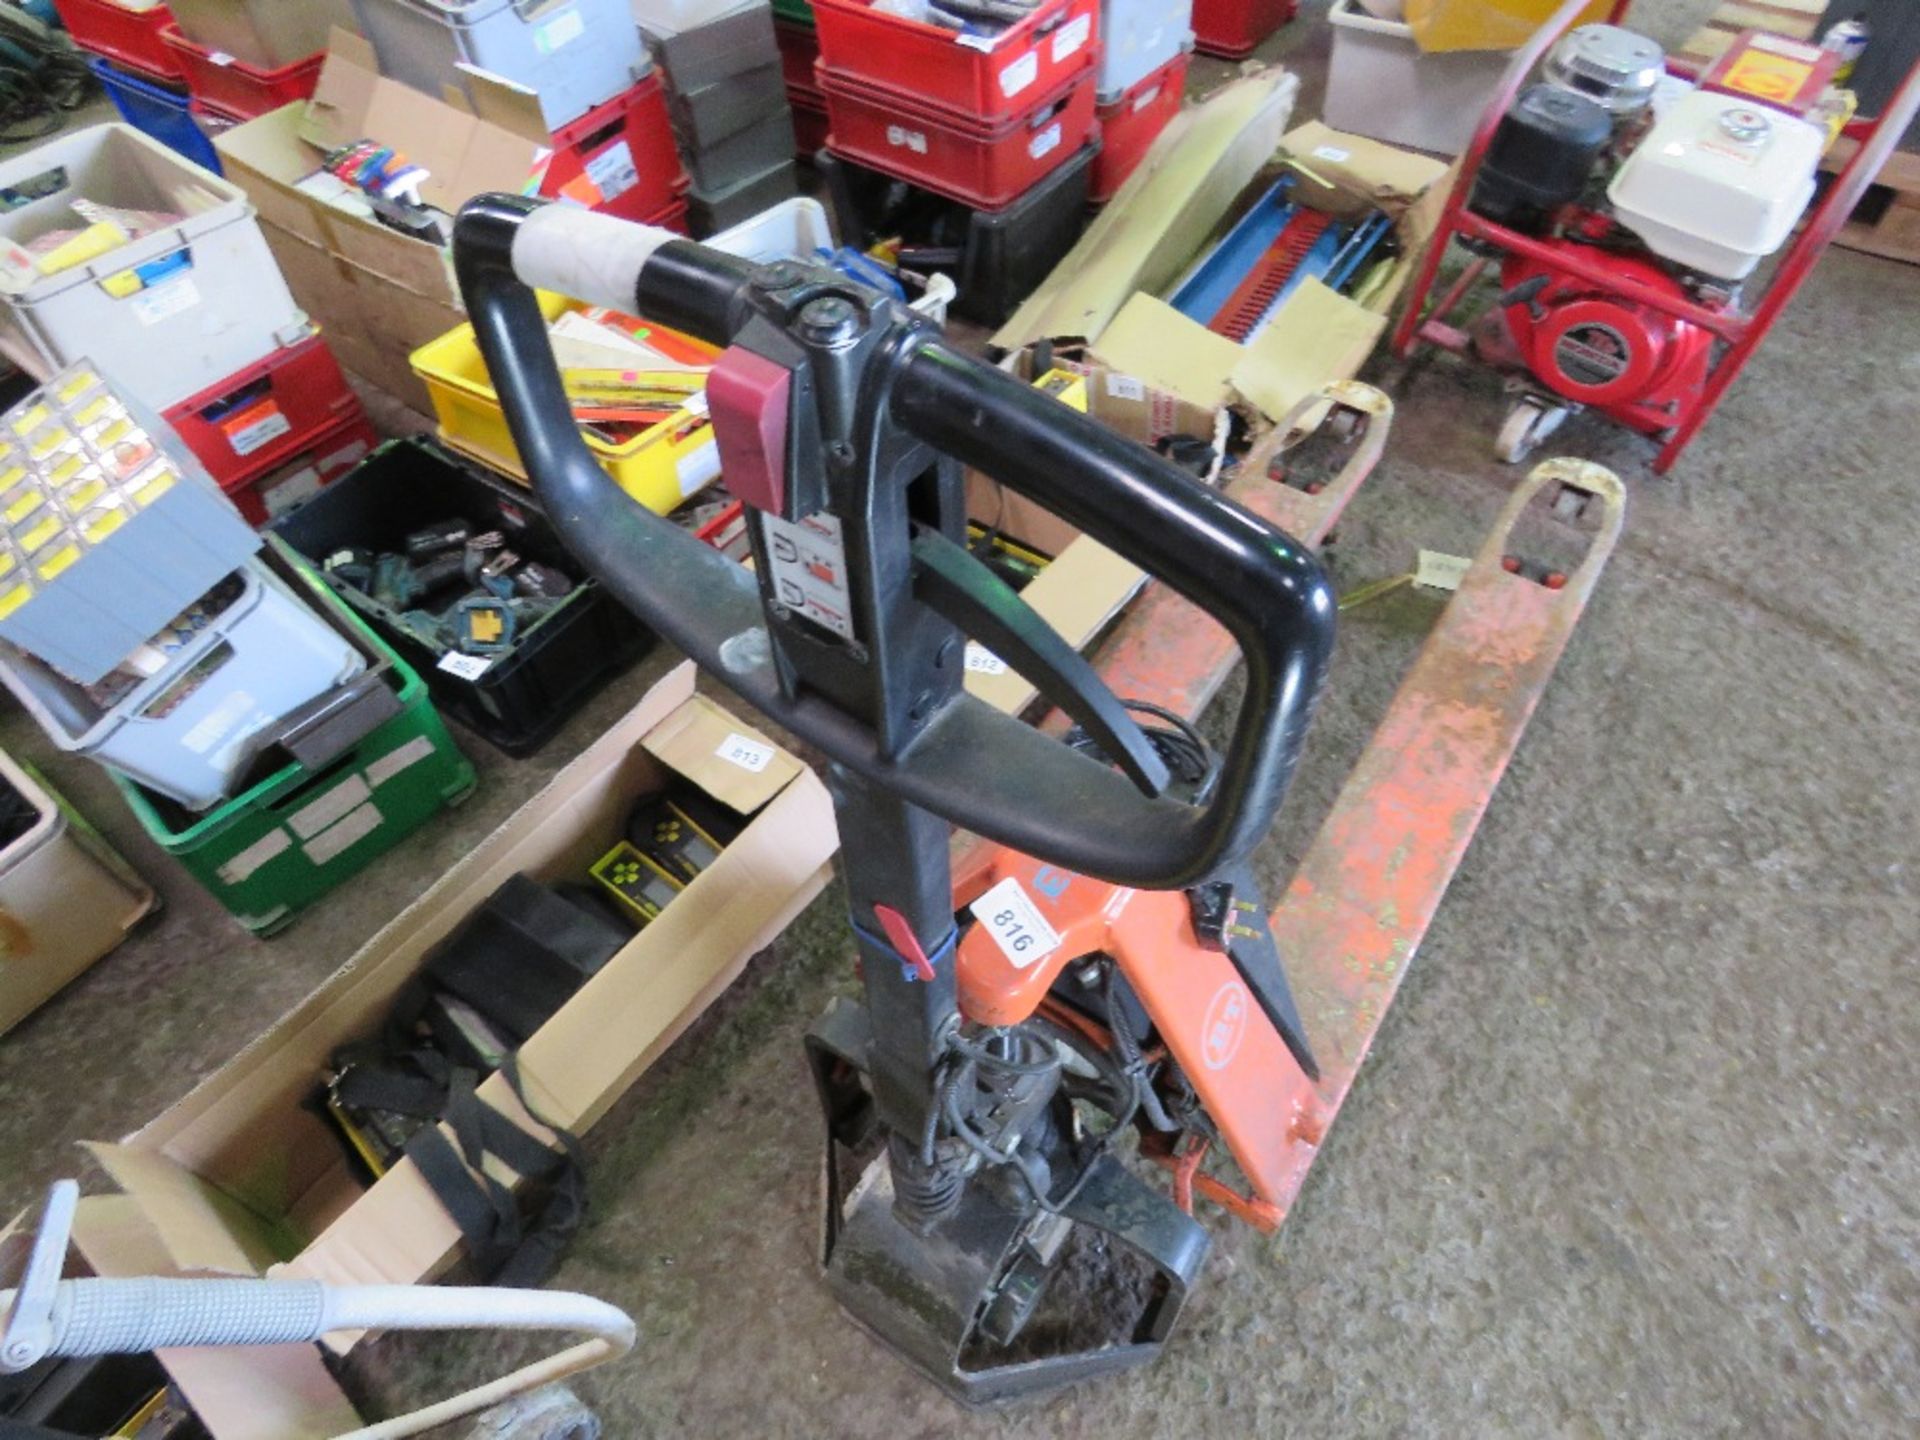 BT LIFTERS 1000KG RATED ELECTRIC PALLET TRUCK. BATTERY APPEARS FLAT THEREFORE UNTESTED ON DRIVE BUT - Image 2 of 4